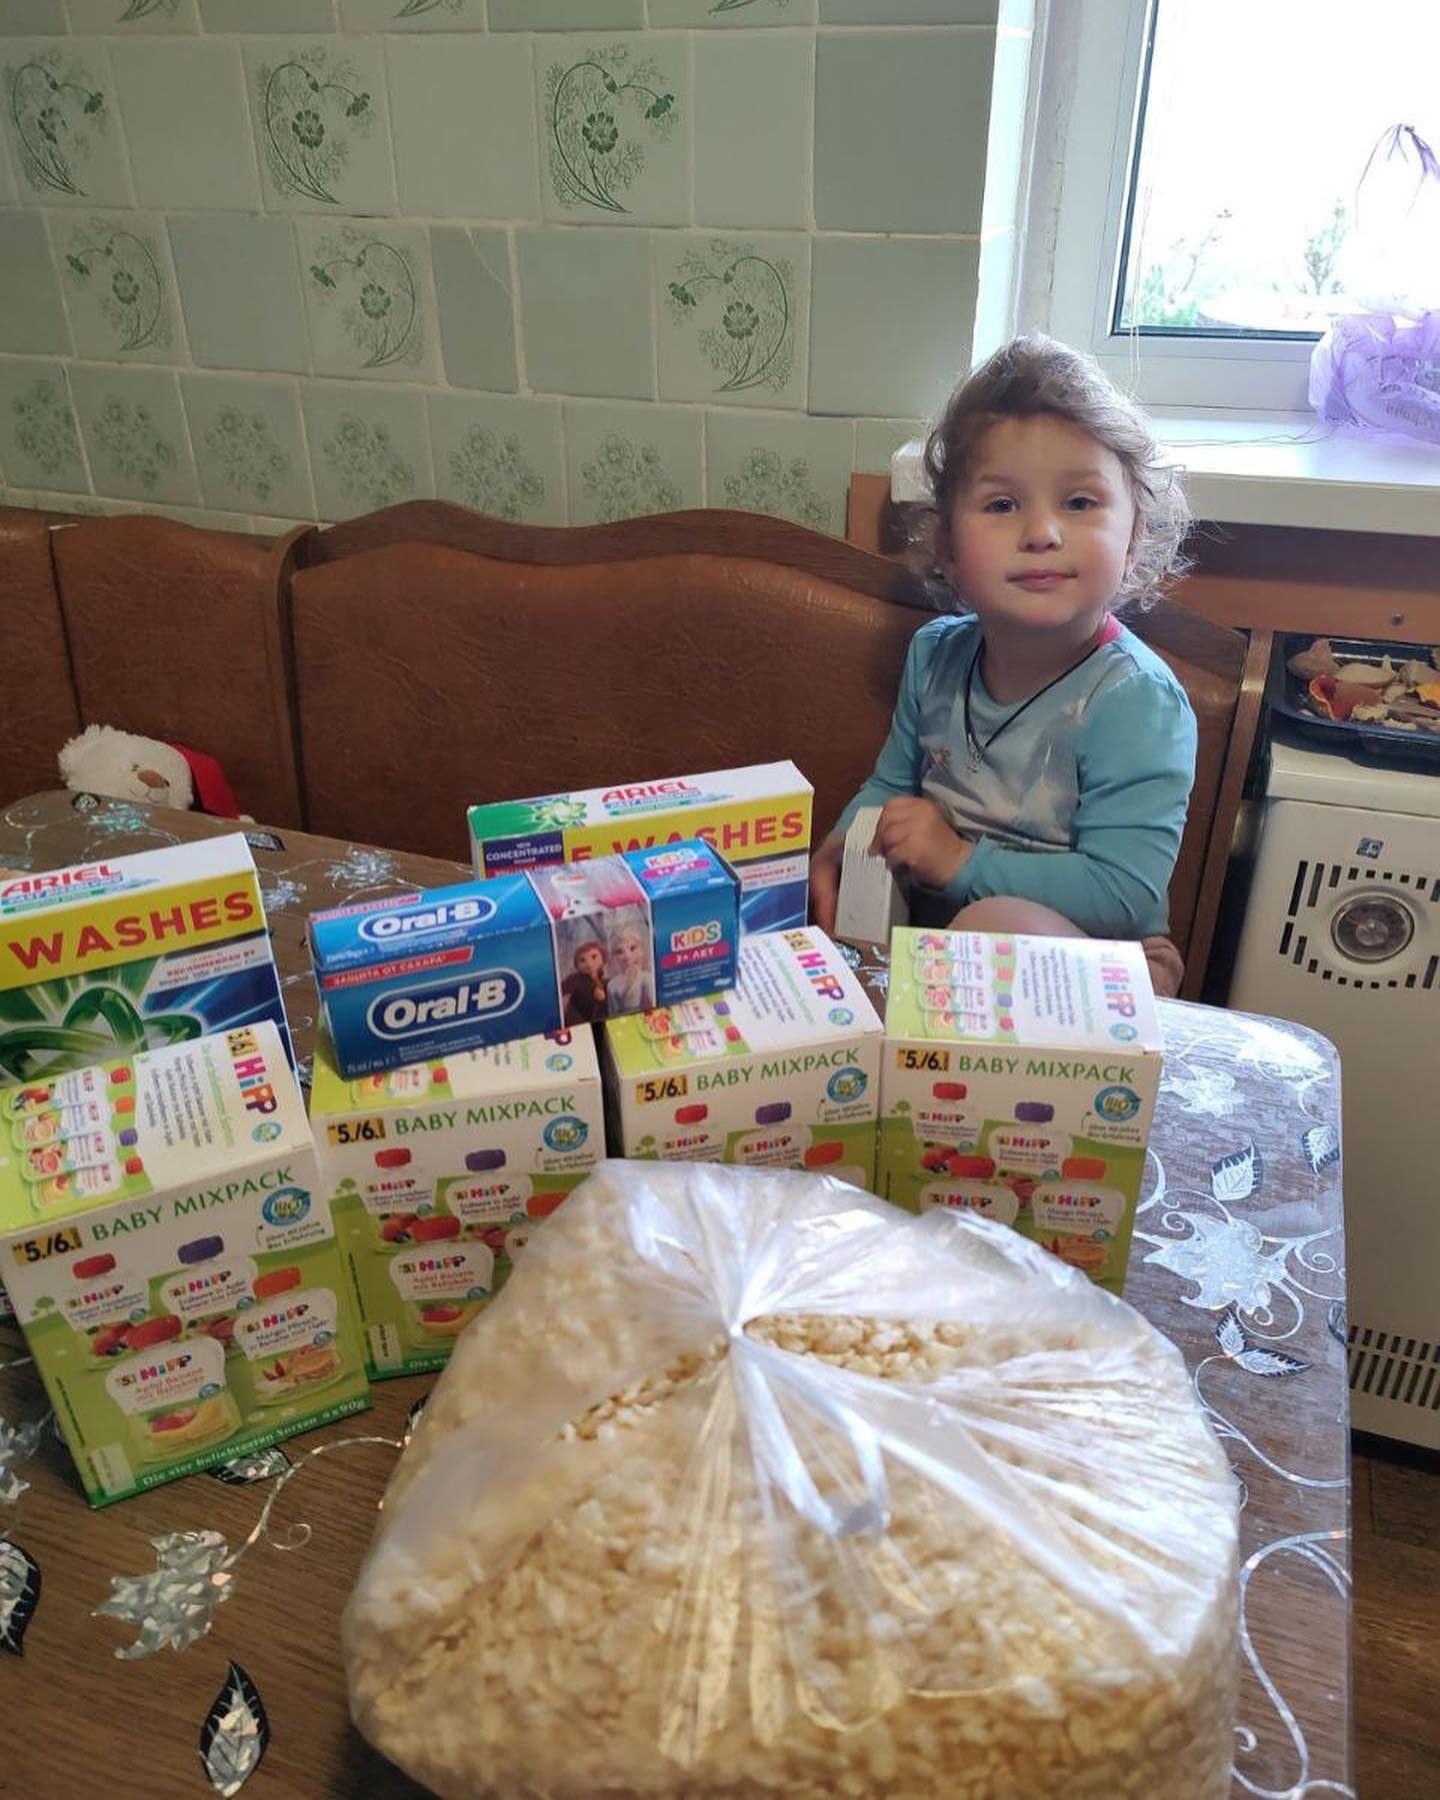 A young child sitting at a kitchen table surrounded by various household and personal care products, including toothpaste and baby wipes, collected for Ukraine relief efforts.